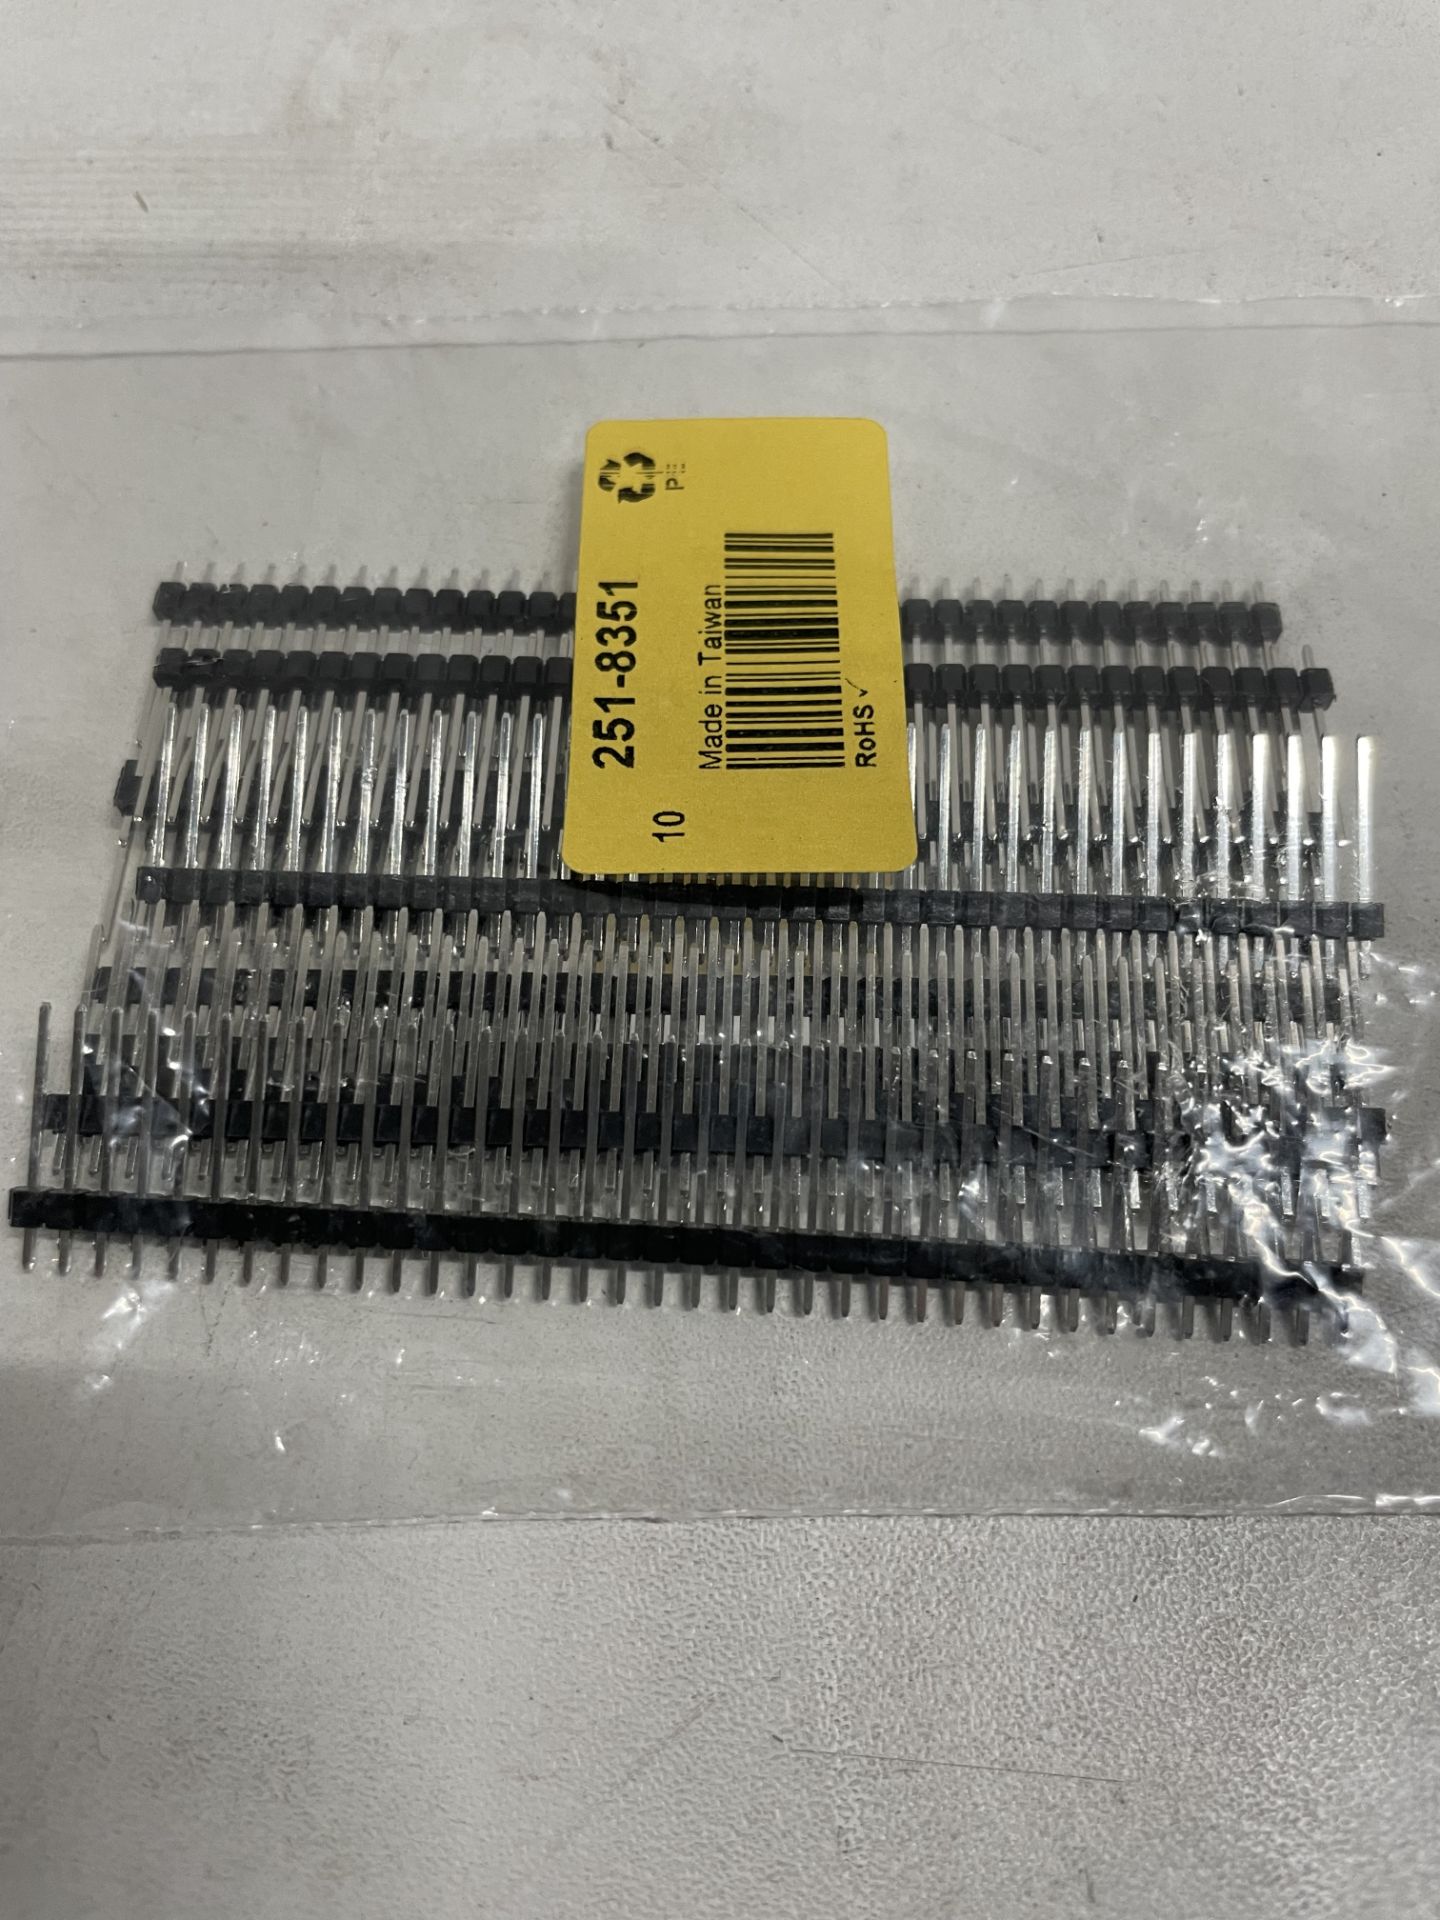 Approximately 1500 RS-PRO 36 way/1 row Straight Pin Header